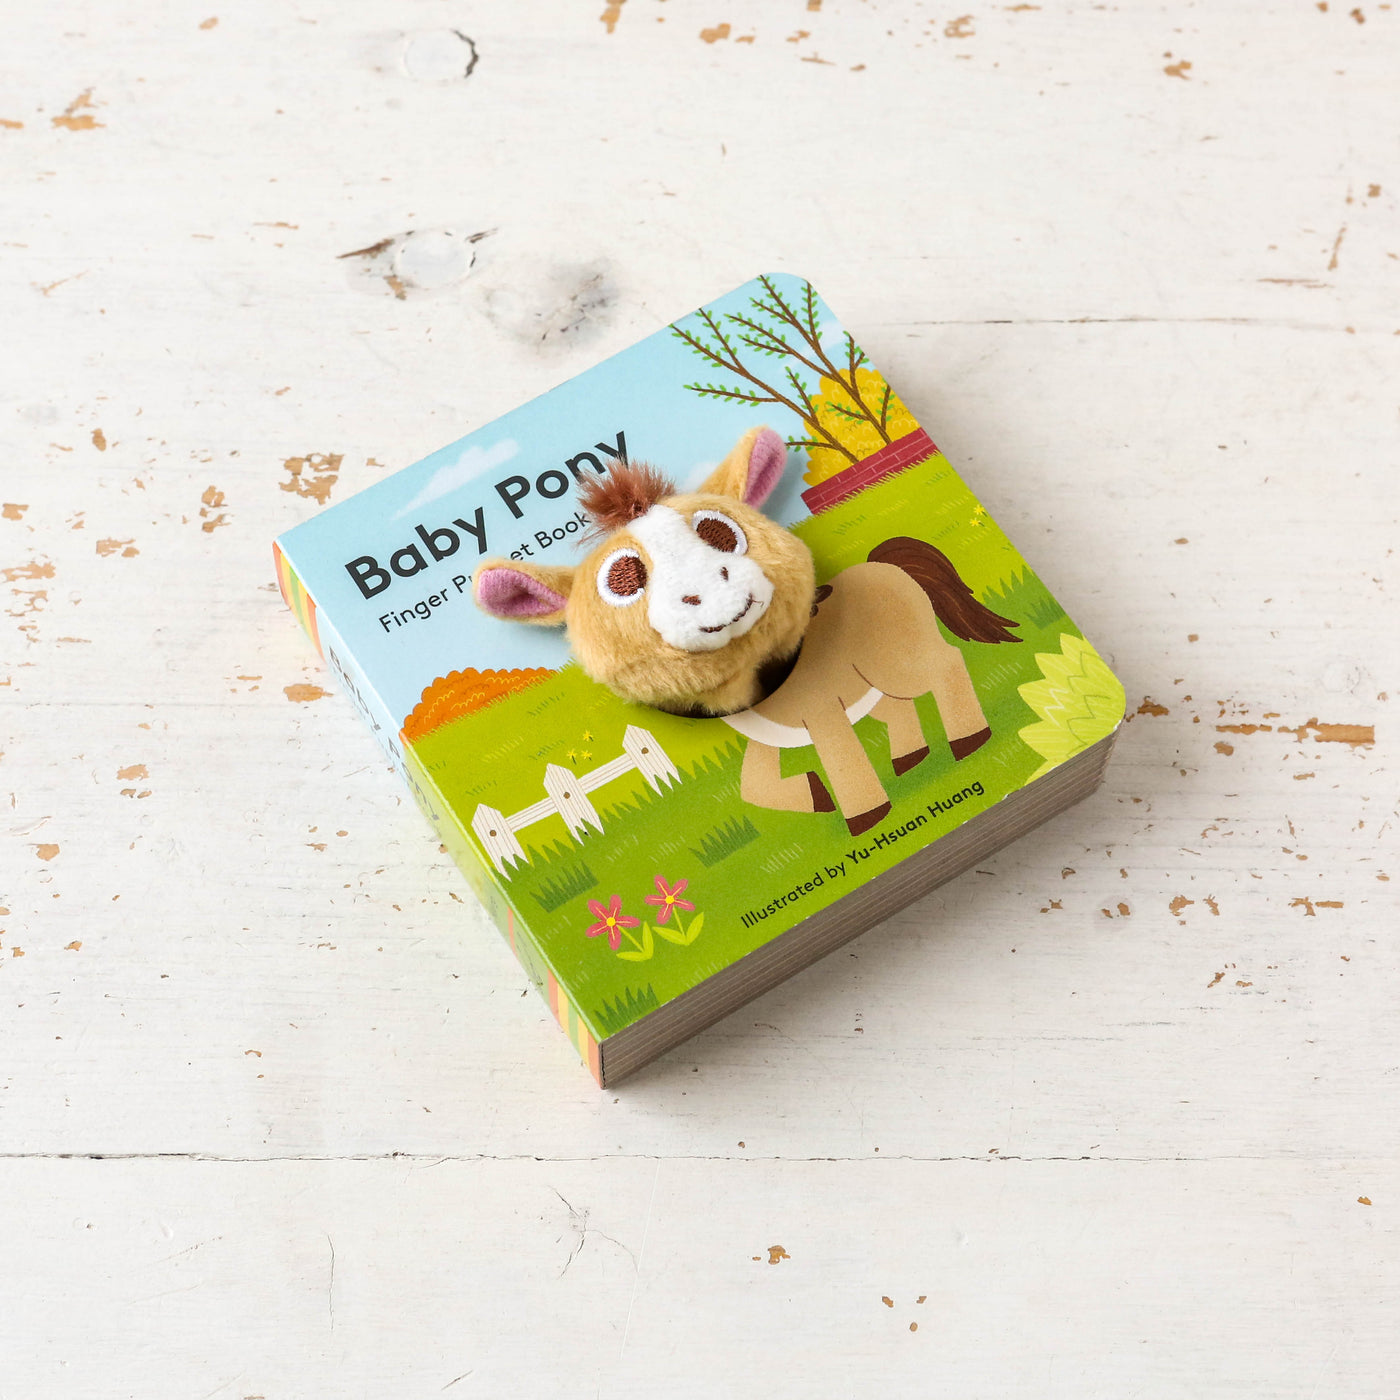 Finger Puppet Board Book - Baby Pony